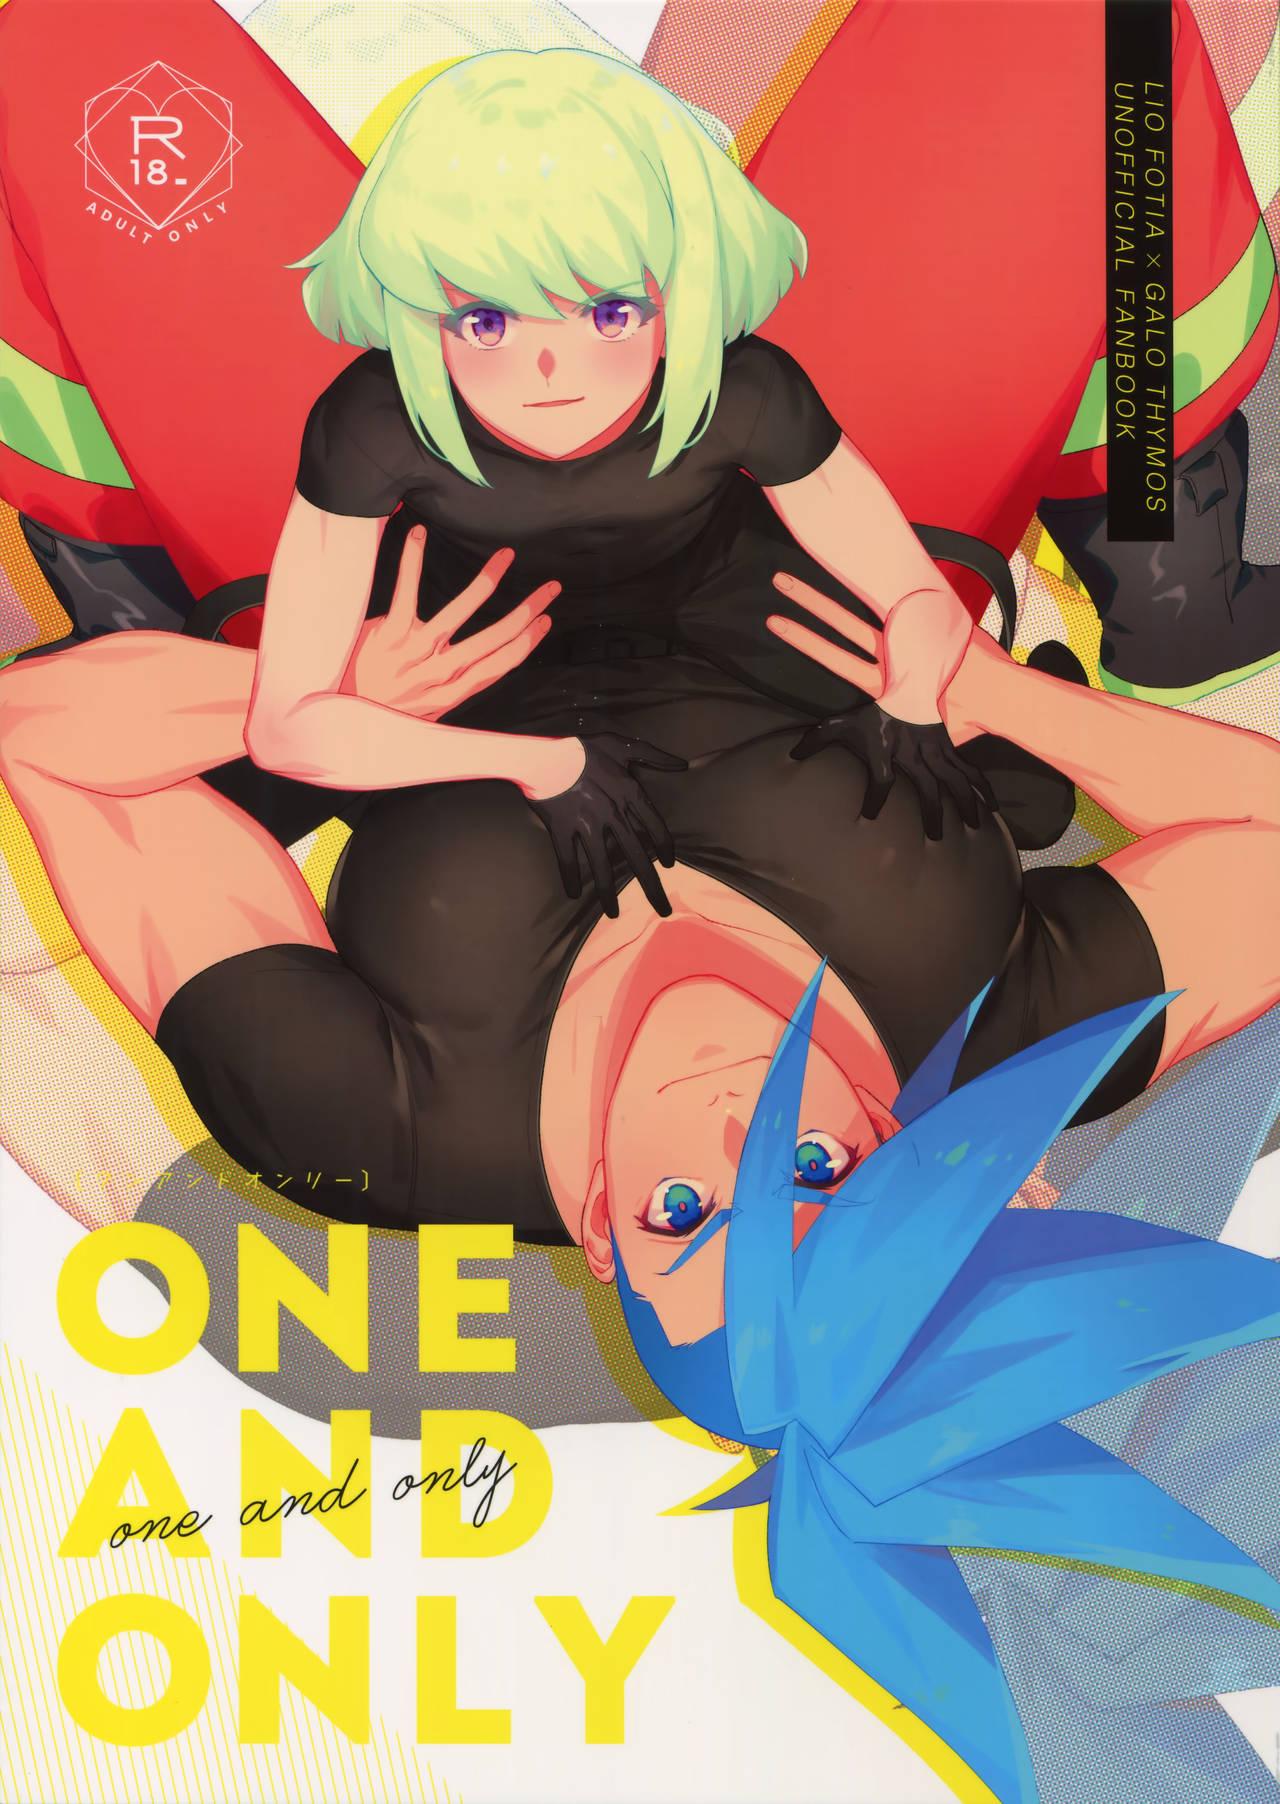 Free Blowjob One and Only - Promare Handjobs - Page 1